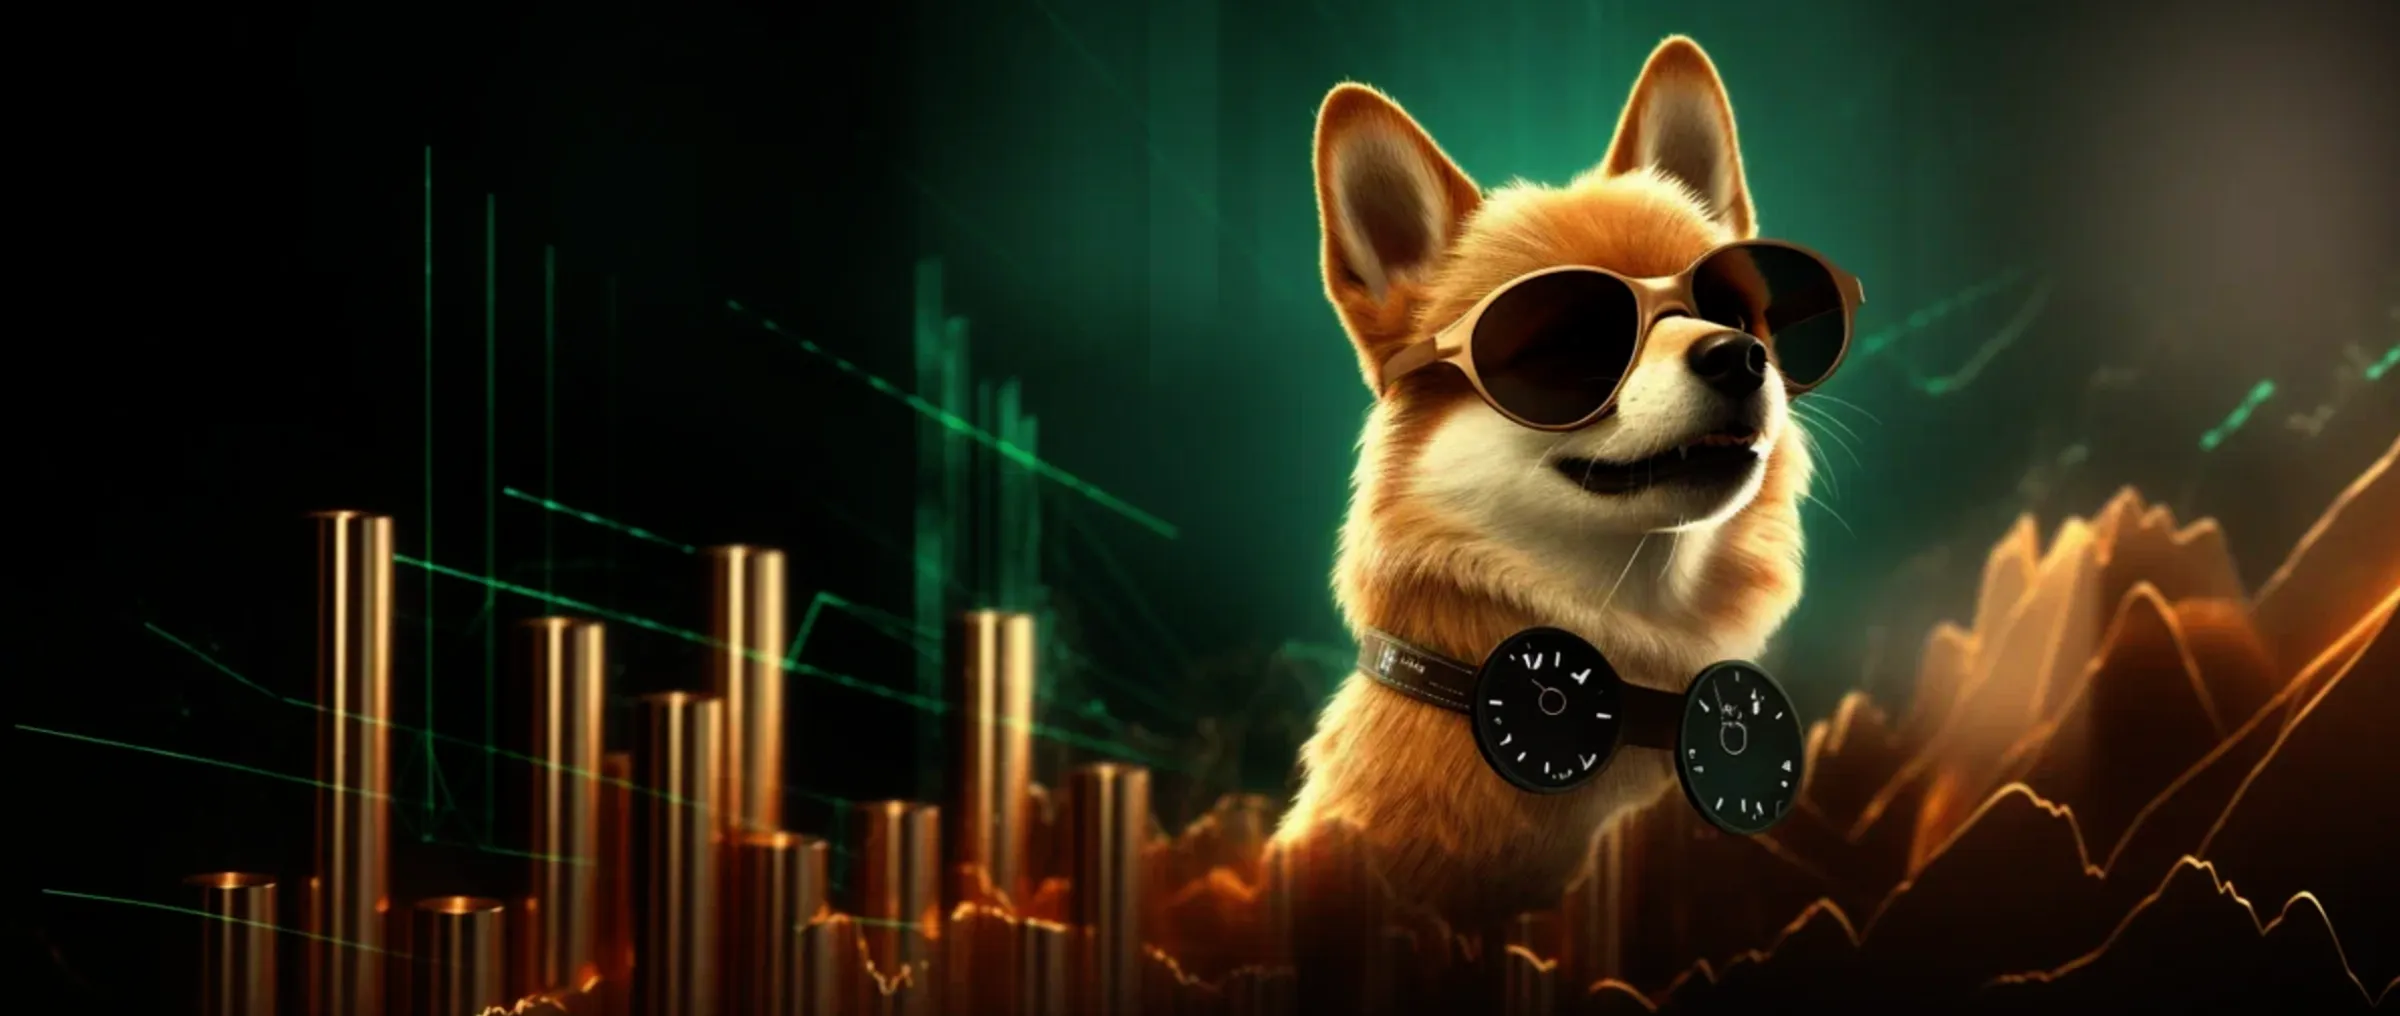 In one day, the whales invested $127 million in Dogecoin